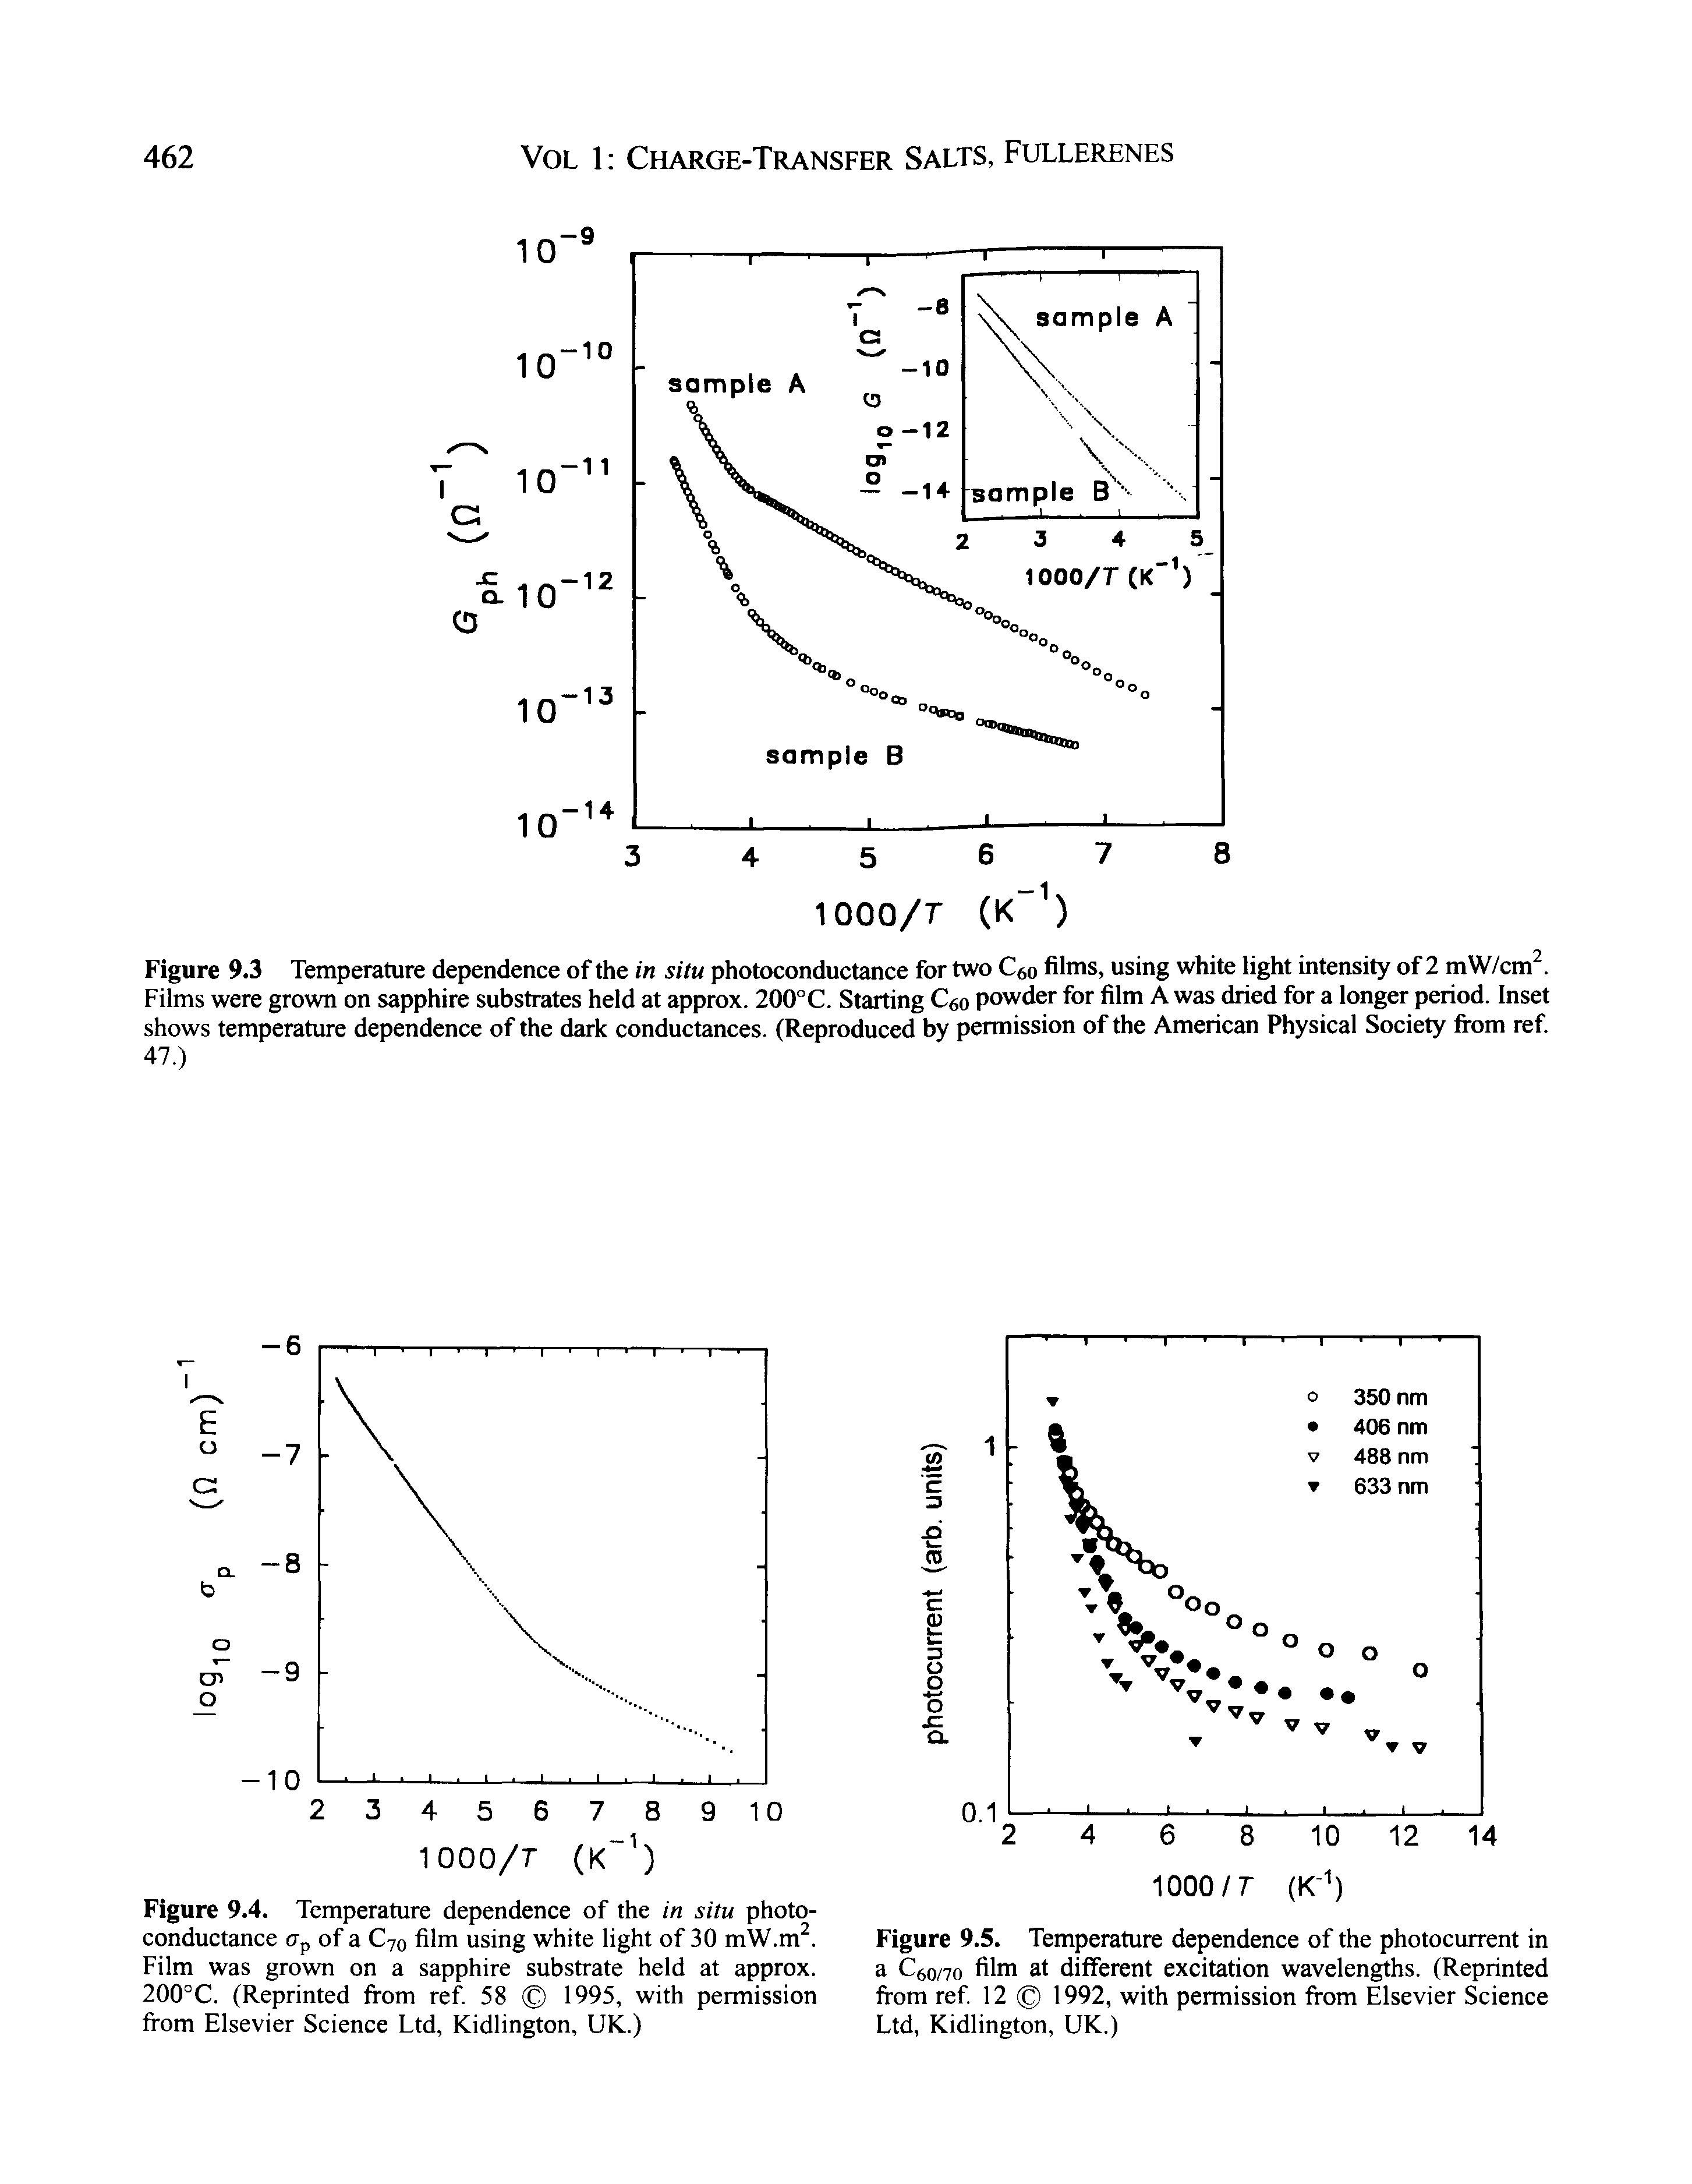 Figure 9.3 Temperature dependence of the in situ photoconductance for two Ceo films, using white light intensity of 2 mW/cm. Films were grown on sapphire substrates held at approx. 200°C. Starting Qo powder for film A was dried for a longer period. Inset shows temperature dependence of the dark conductances. (Reproduced by permission of the American Physical Society from ref...